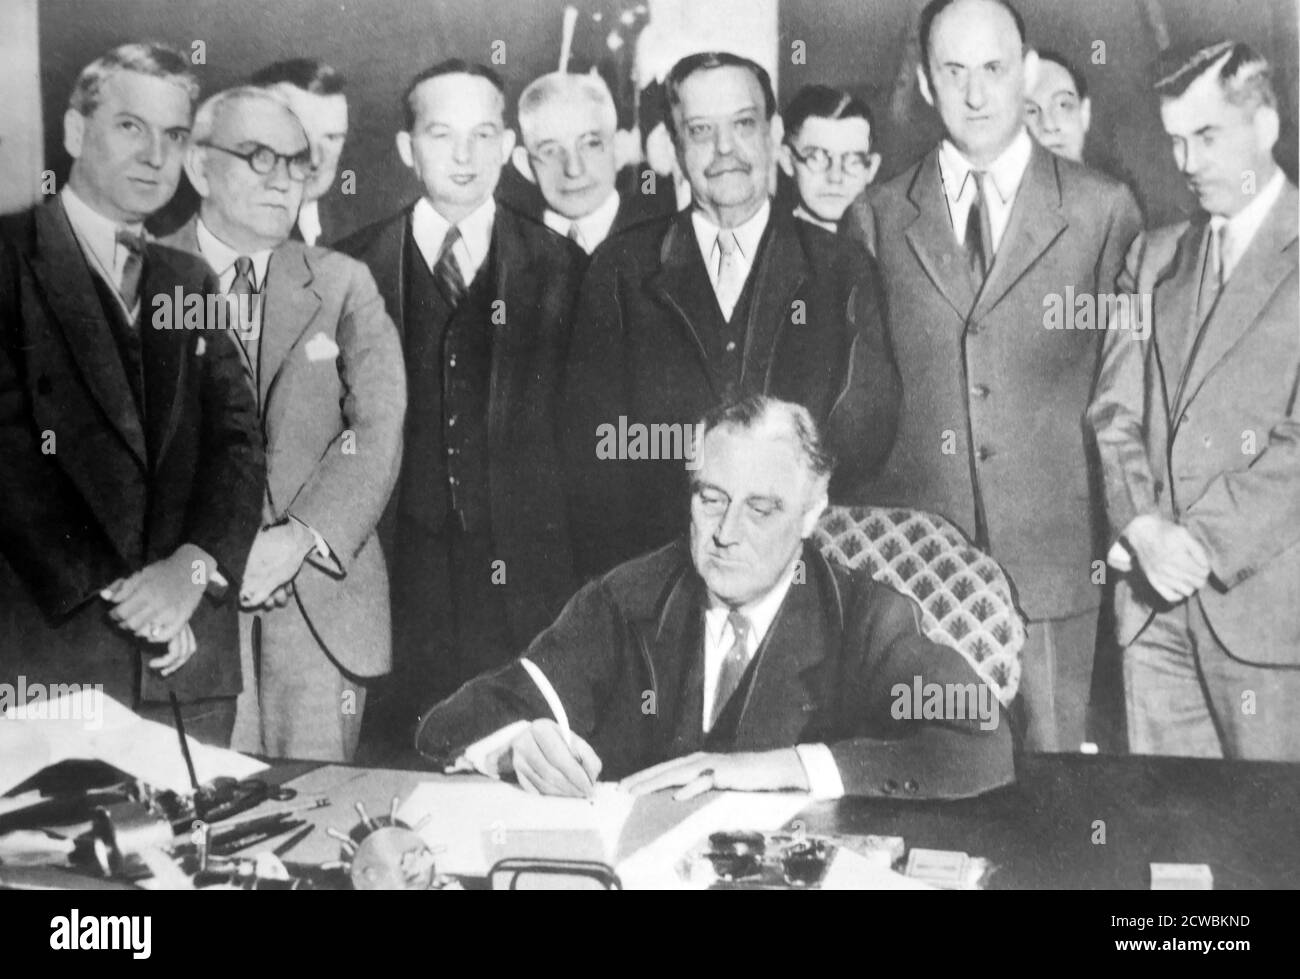 Black and white photo of US President Franklin D. Roosevelt (1882-1945) in the White House signing a document surrounded by his principal collaborators from Brain Trust, a name given to the president's closest advisors. Stock Photo